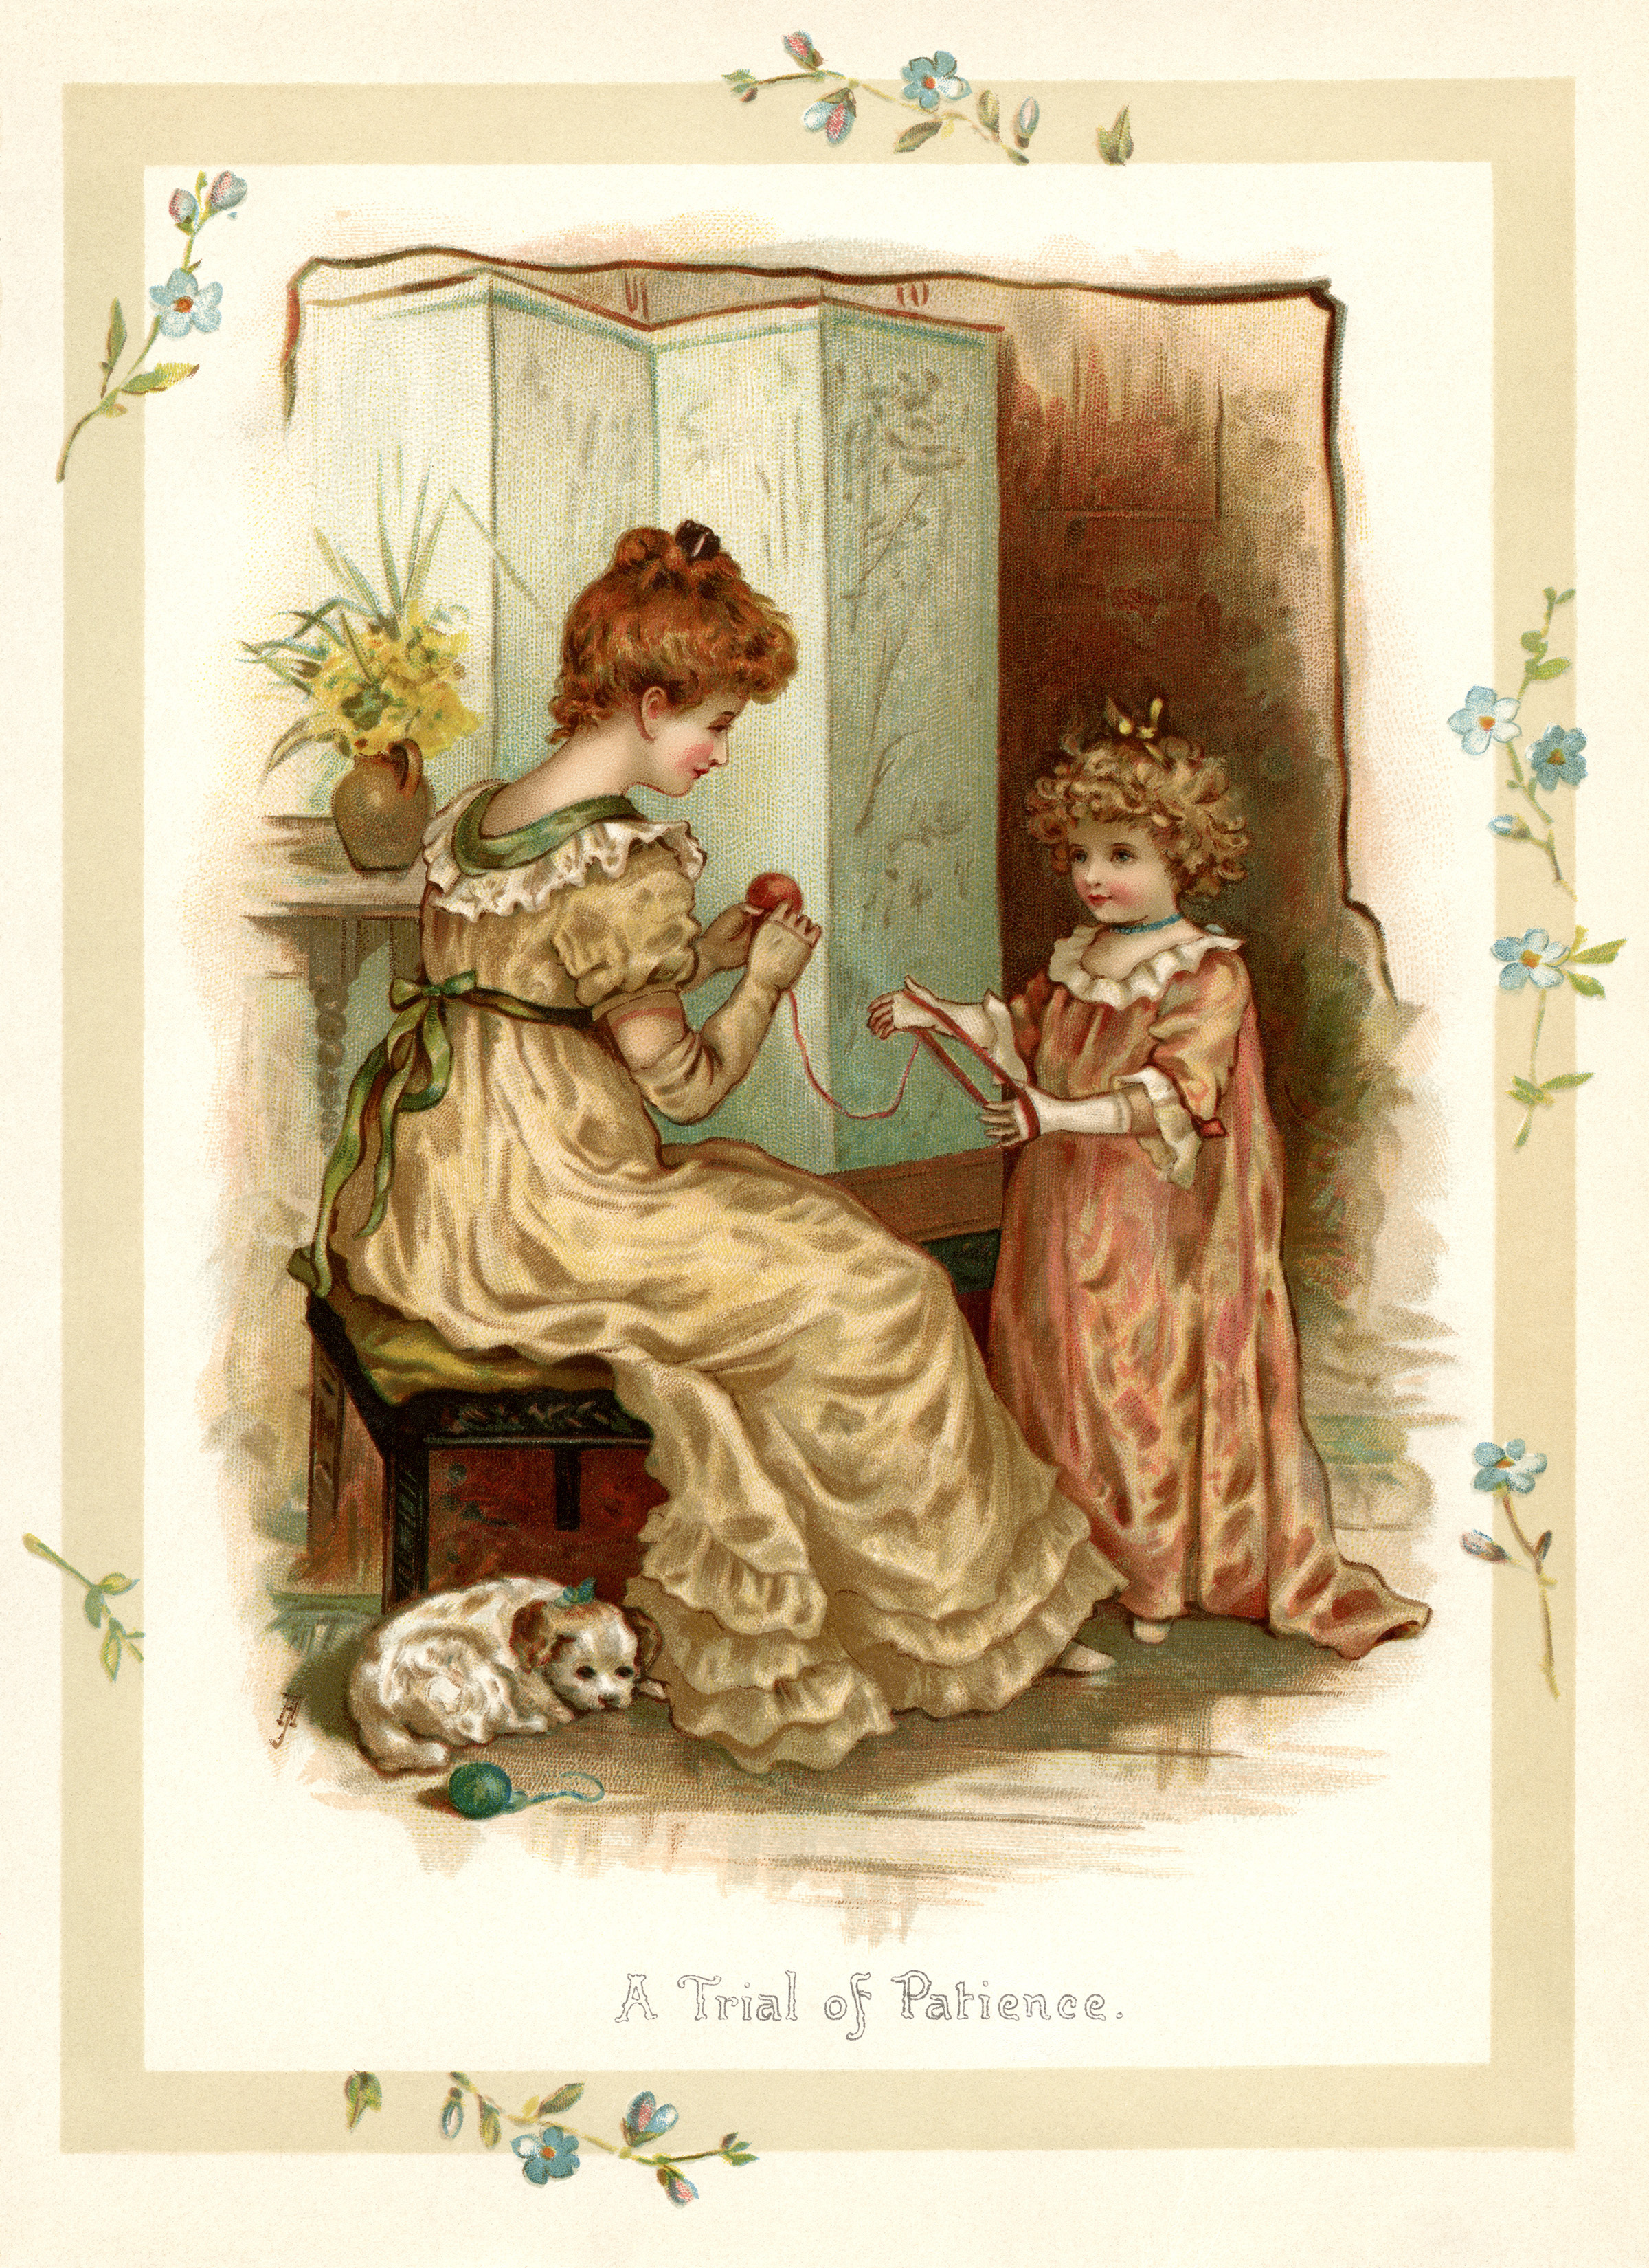 vintage storybook illustration, trial of patience, Victorian mother and child, sunbeams and me, vintage mom and daughter printable